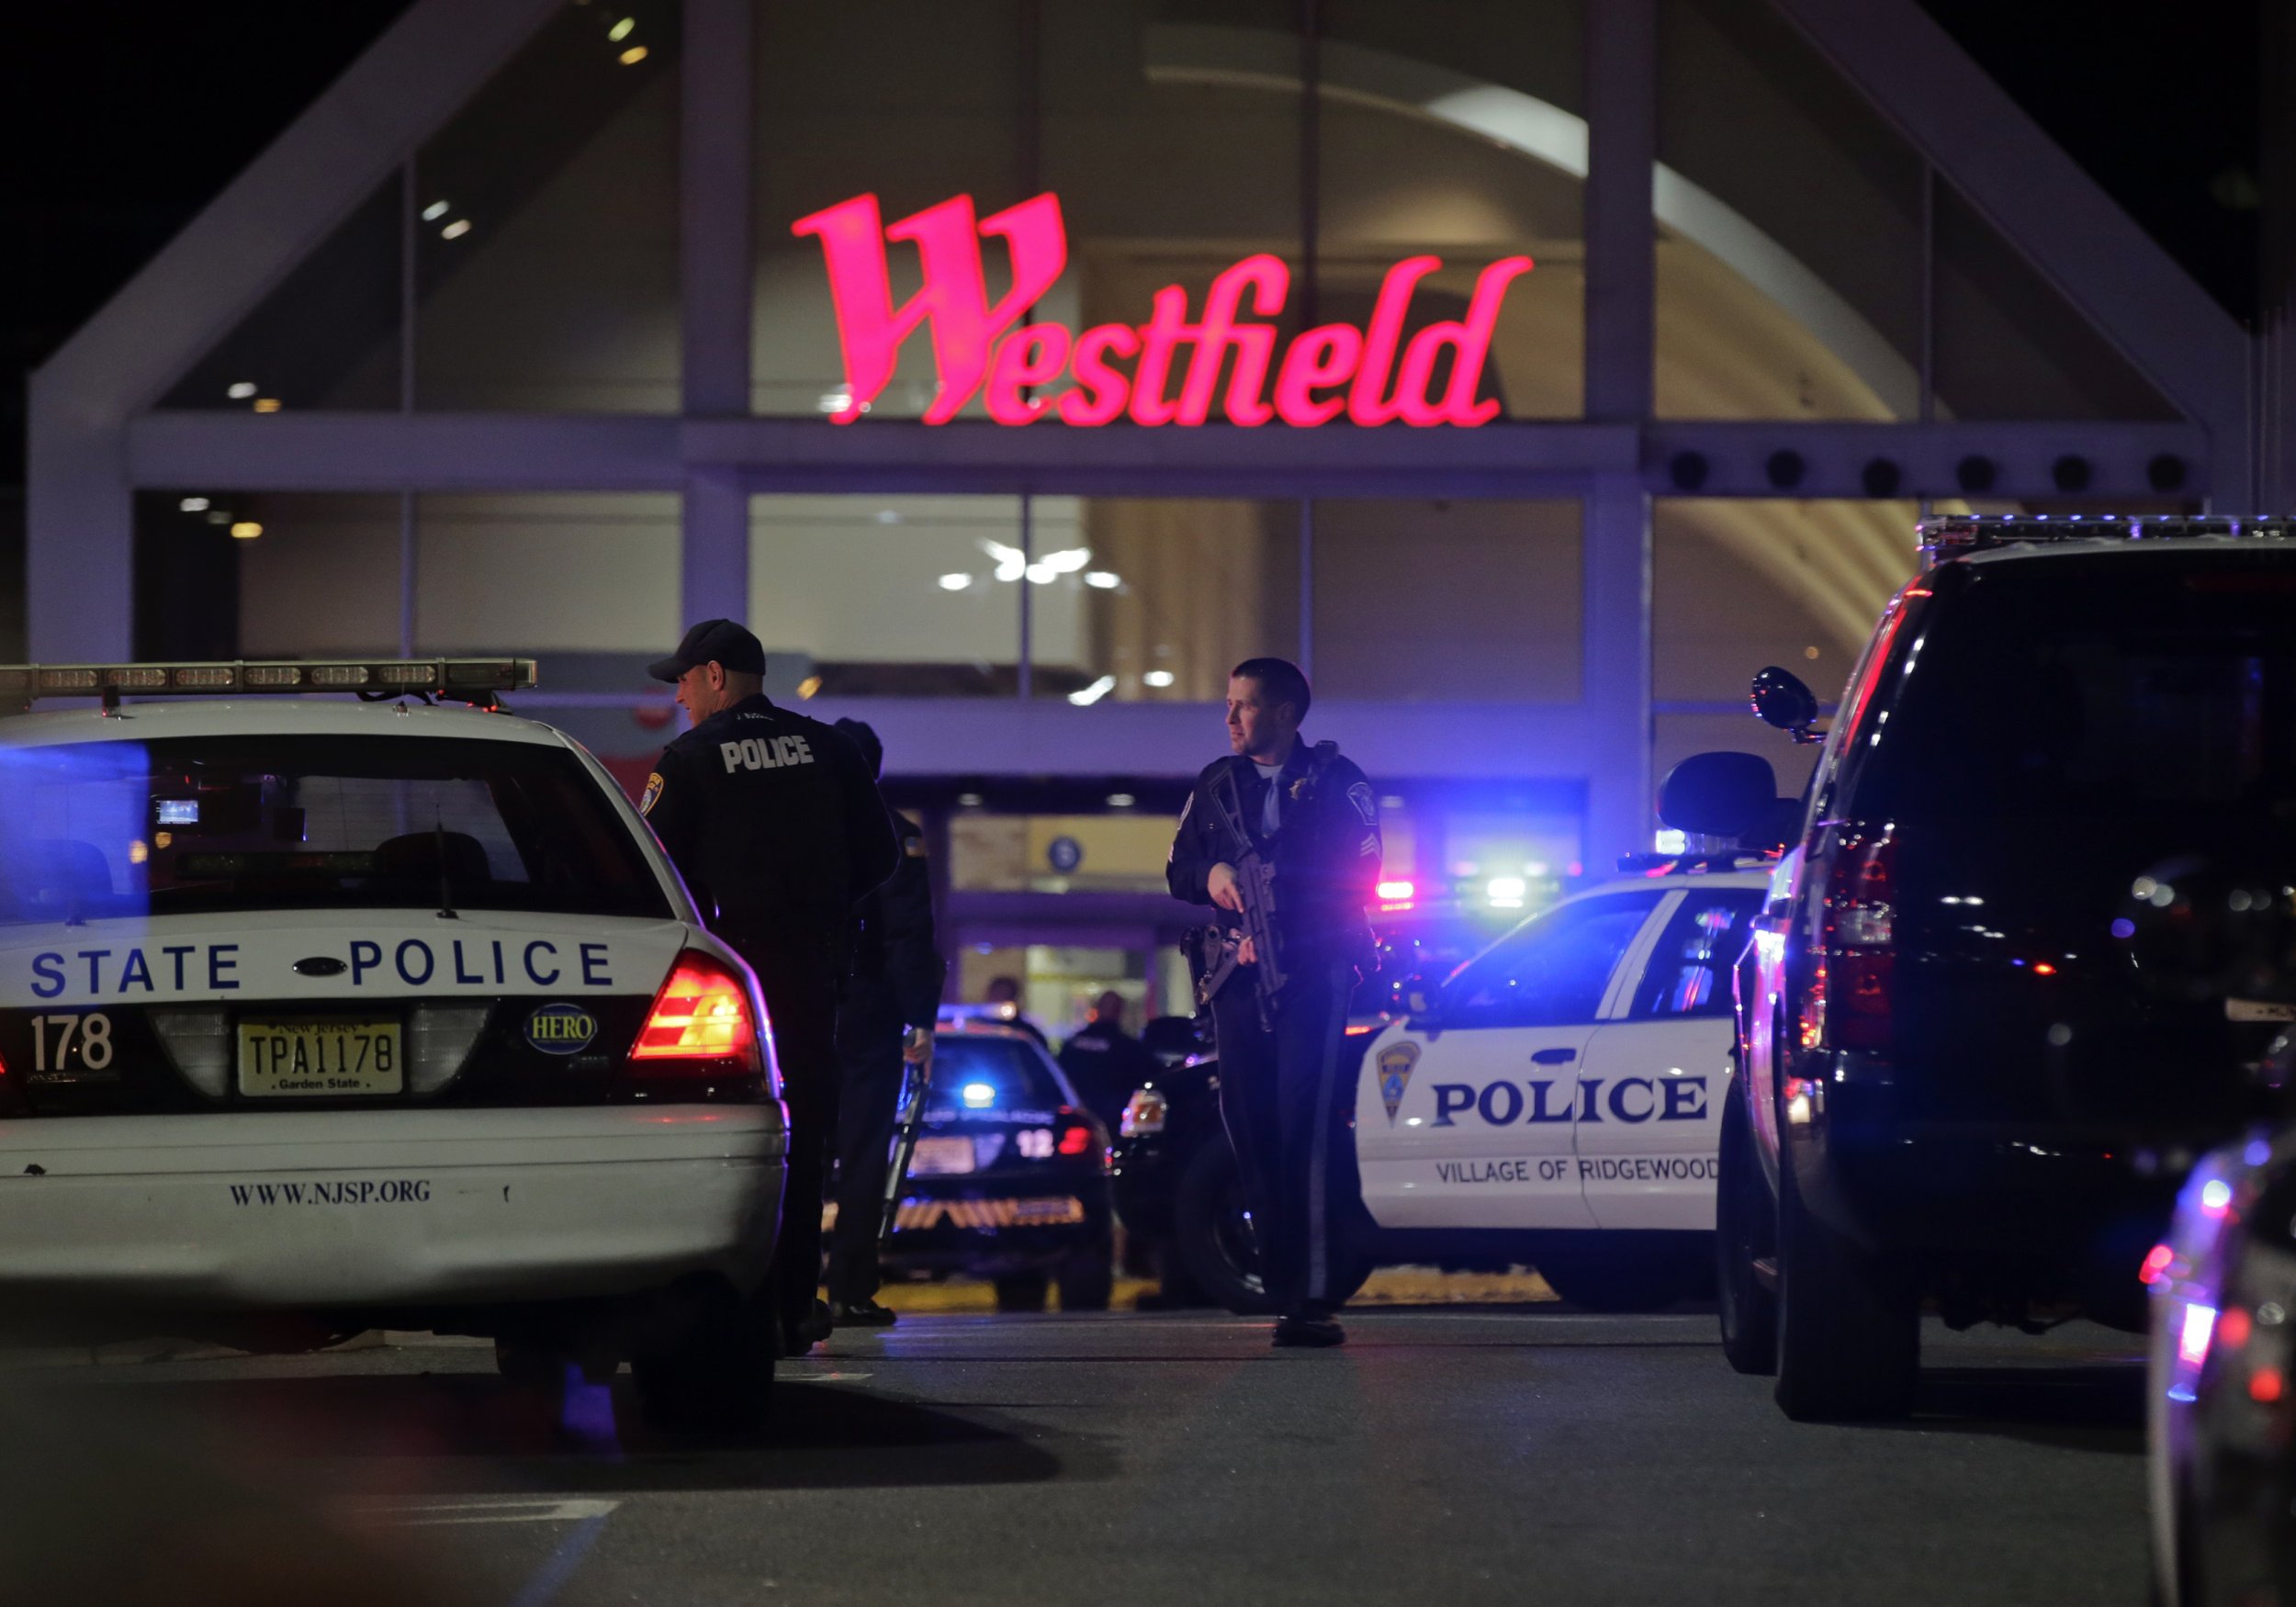 New Jersey mall shooter's last text revealed as Garden State Plaza